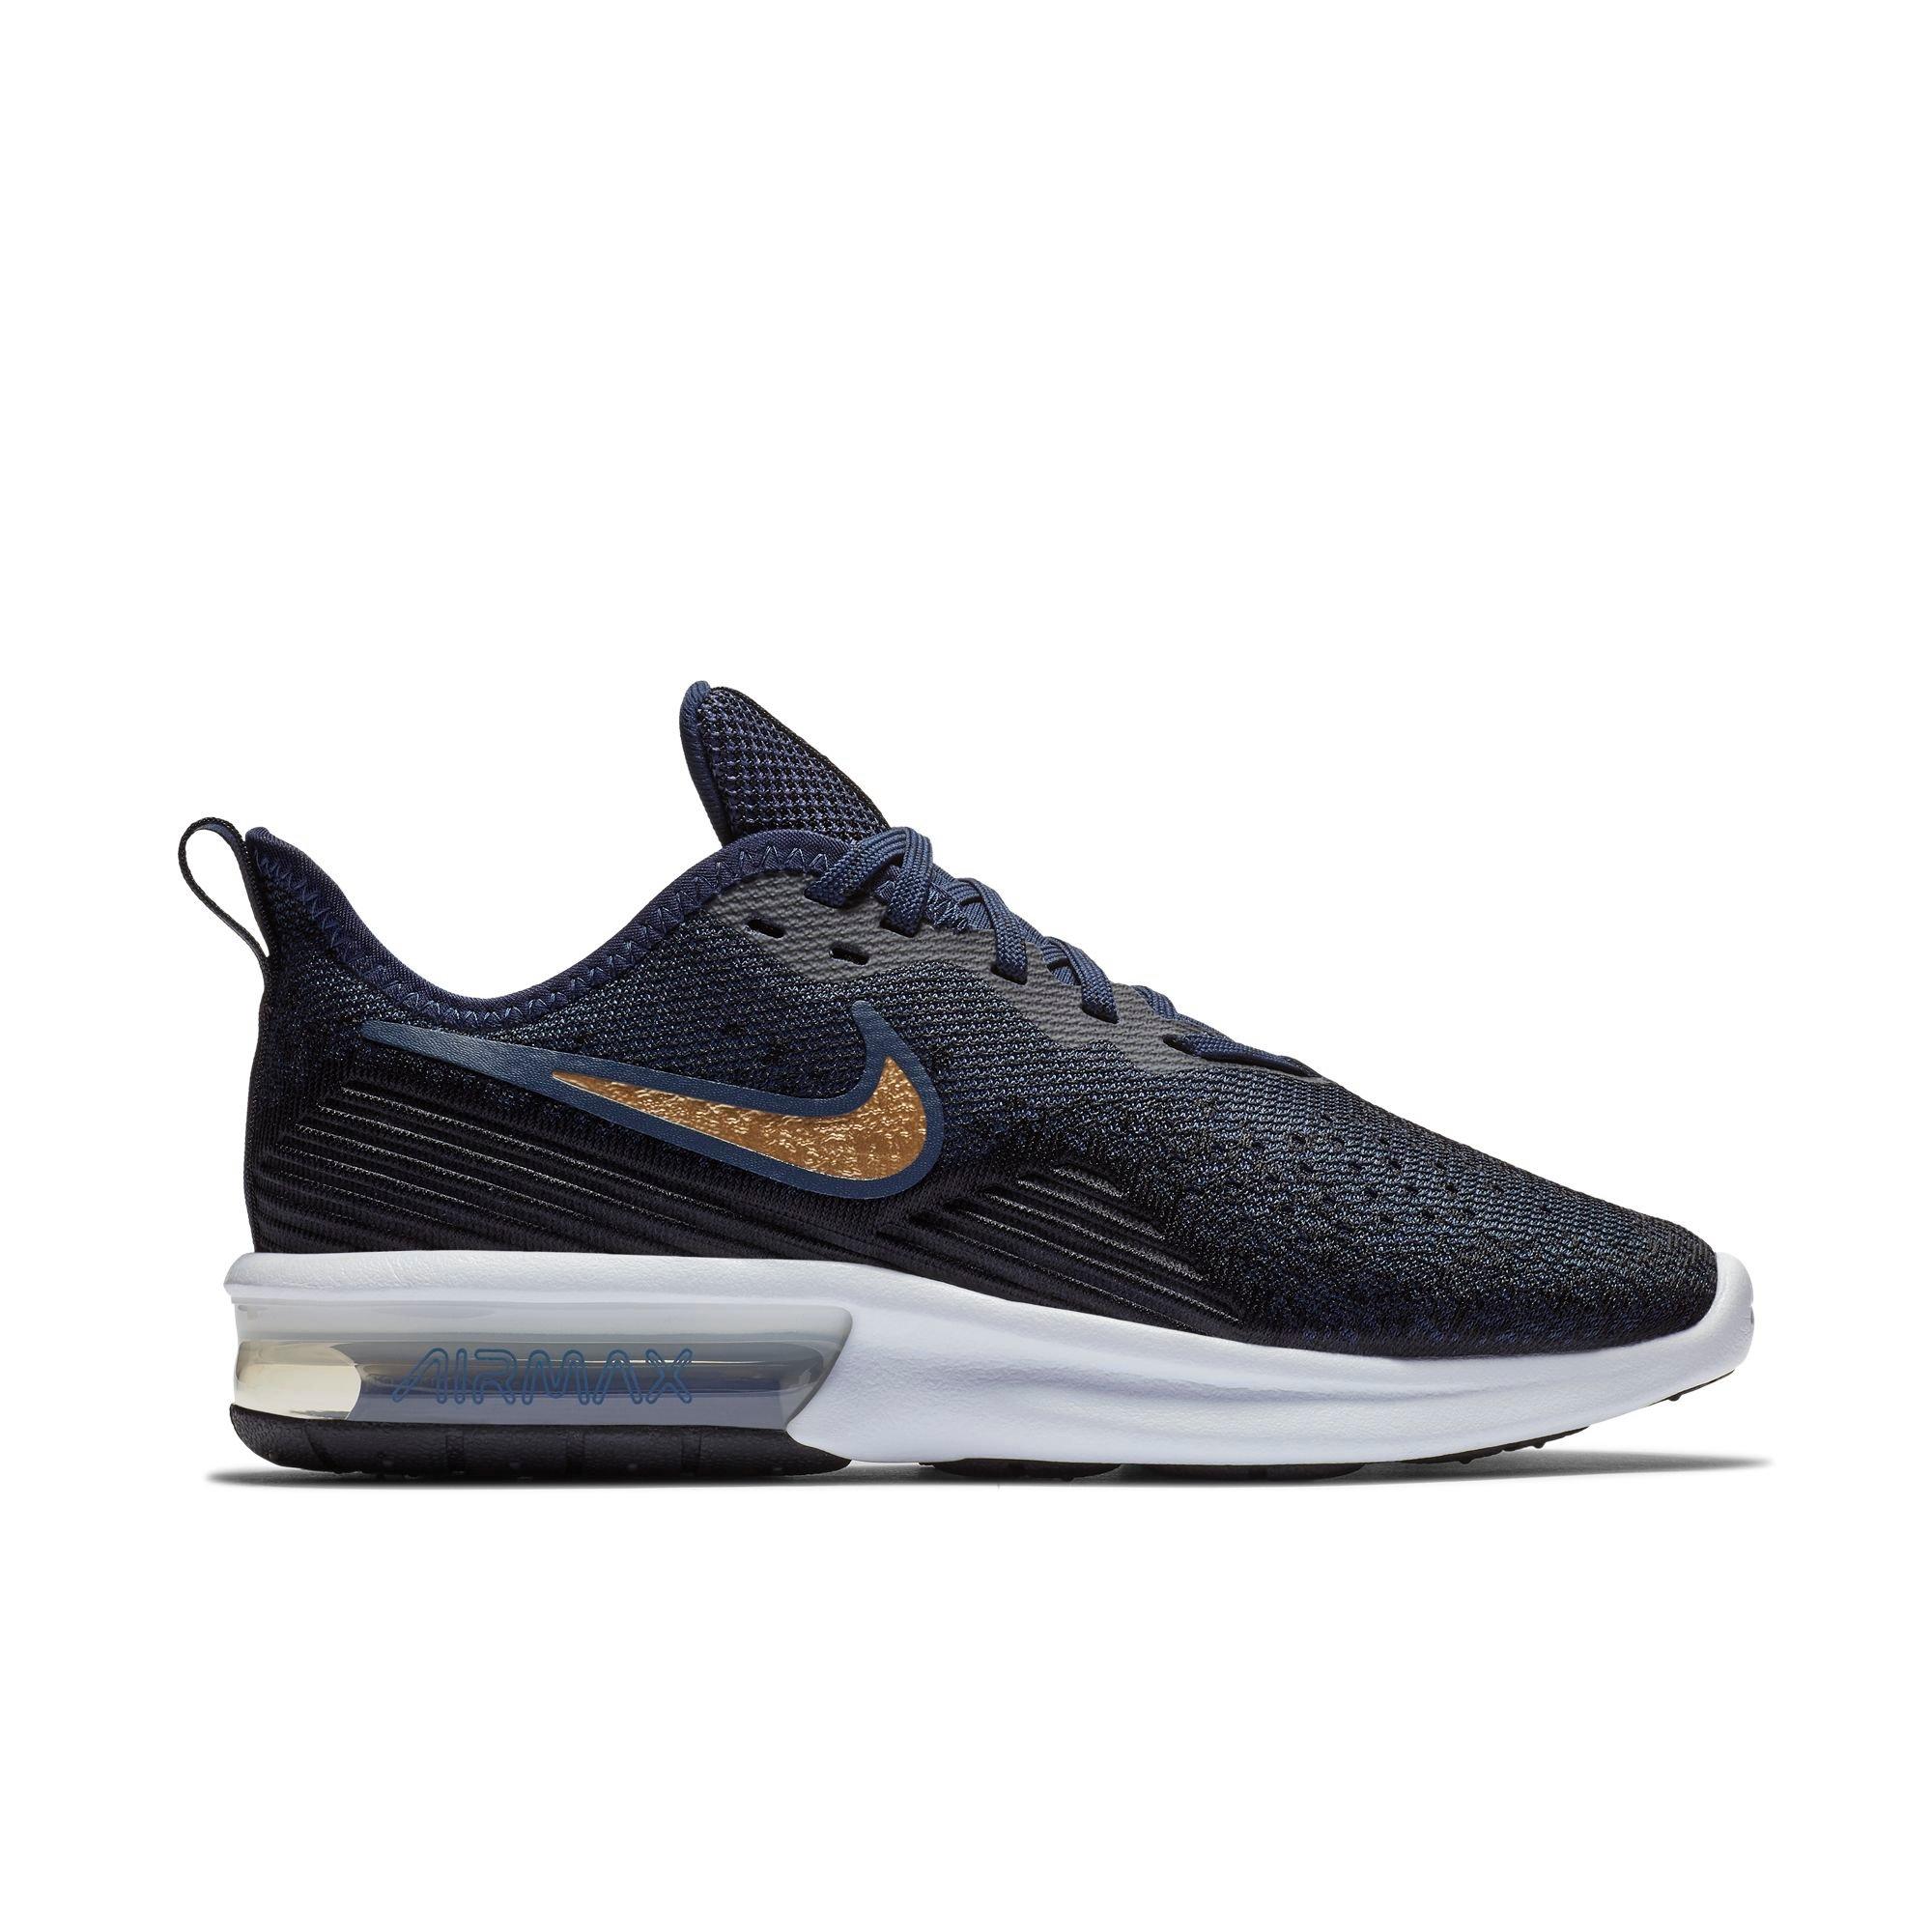 nike women's air max sequent 4 running shoe